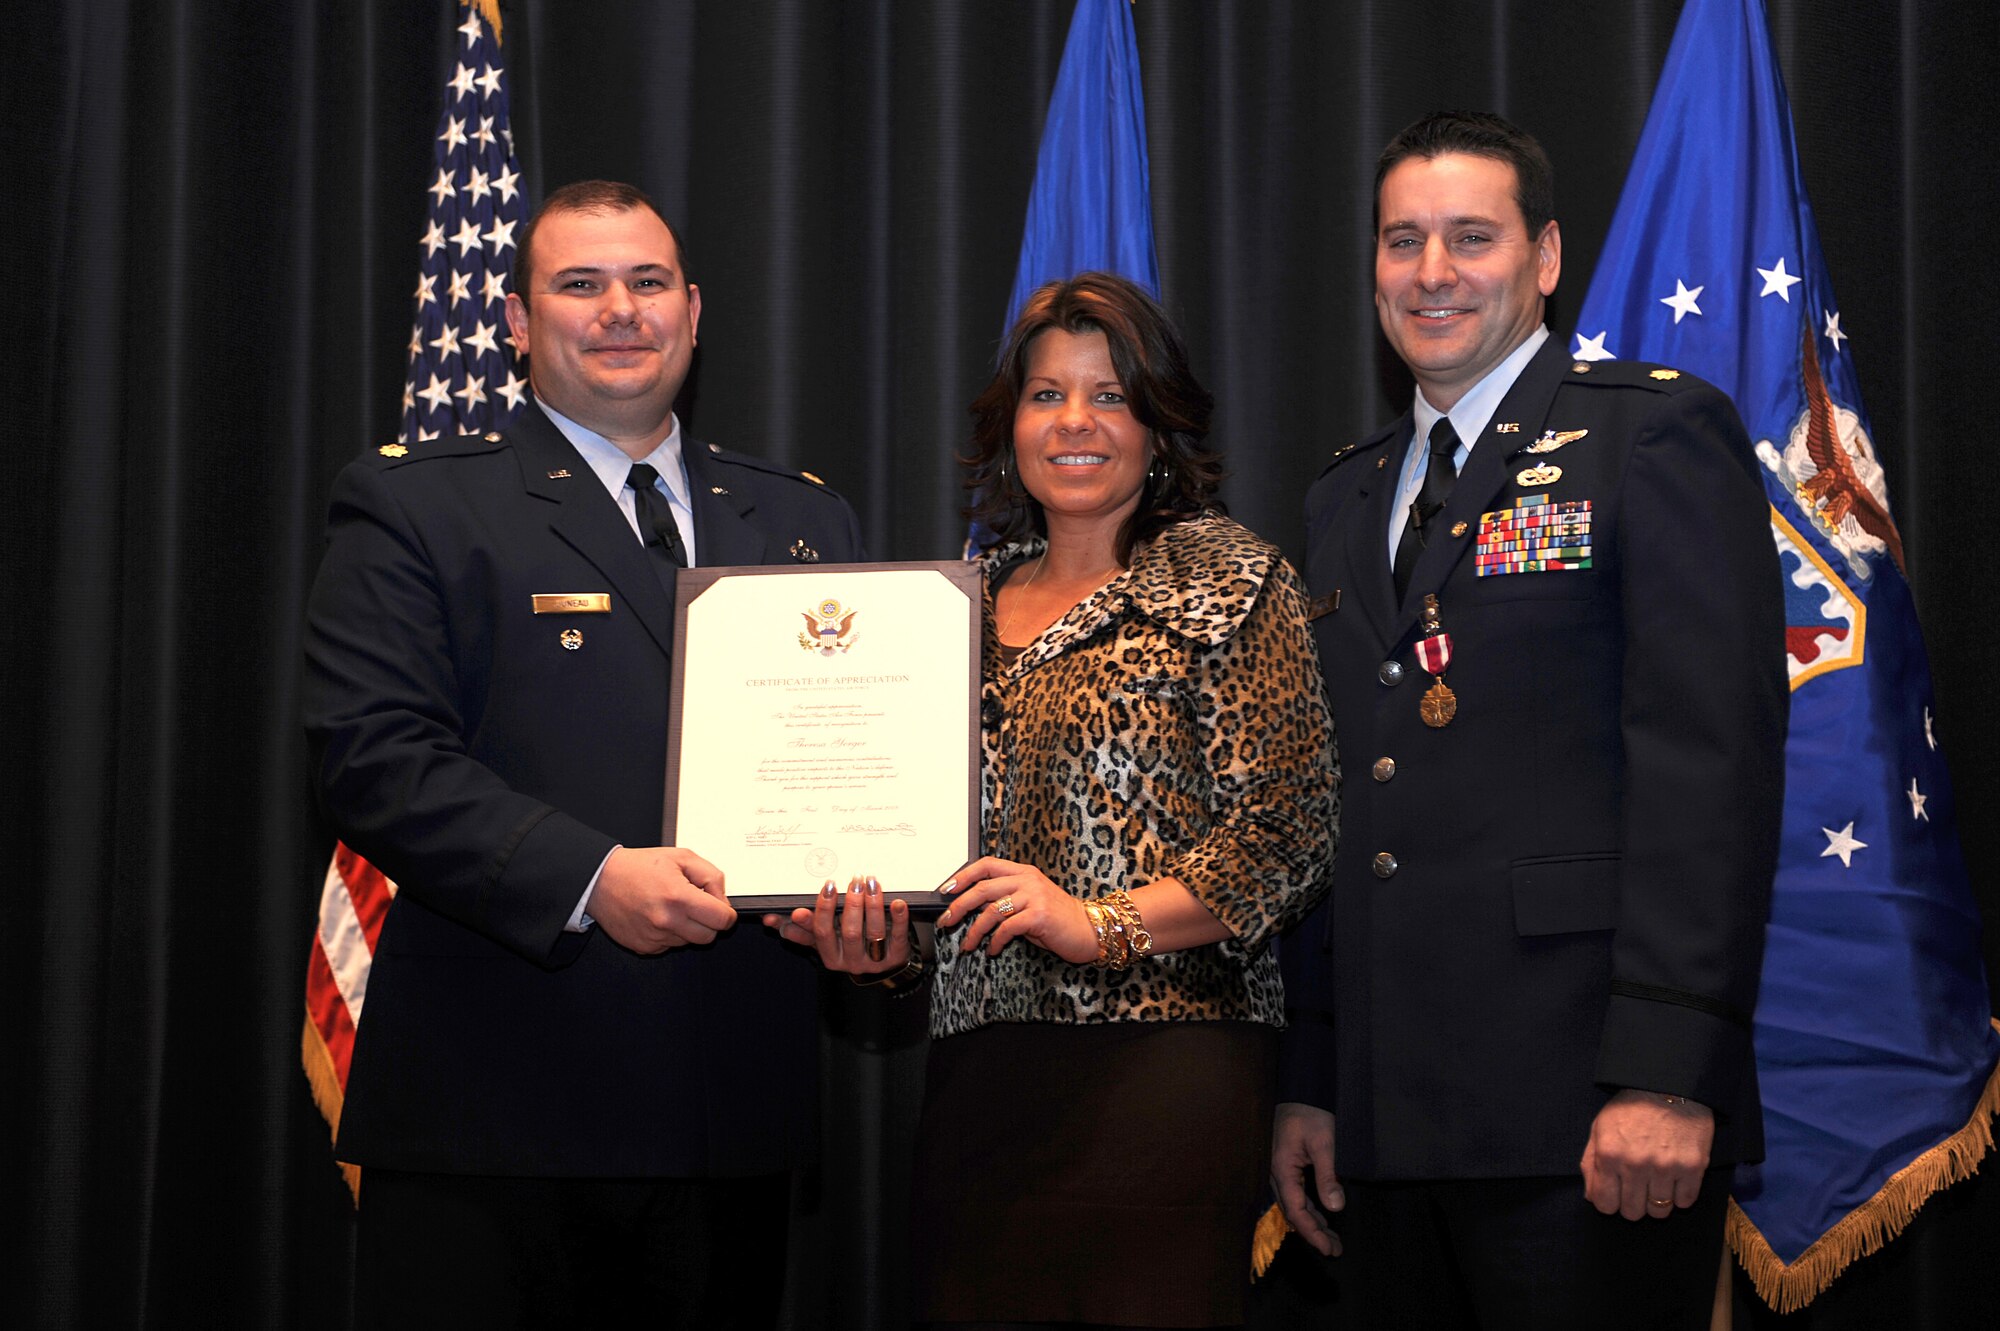 Maj. Craig Juneau, from Scott Air Force Base, Ill., presents a certificate of appreciation to Theresa, wife of Maj. John M. Yerger, during Major Yerger's retirement ceremony in the U.S. Air Force Expeditionary Center on Fort Dix, N.J., Jan. 9, 2009.  Major Yerger was the assistant chief, logistics and resources for the Center's Expeditionary Operations School.  Prior to this position, Major Yerger served for four years in the Air Mobility Battlelab as a project manager and the chief of finance and program support.  Major Yerger's retirement is effective March 1. (U.S. Air Force Photo/Staff Sgt. Nathan Bevier)